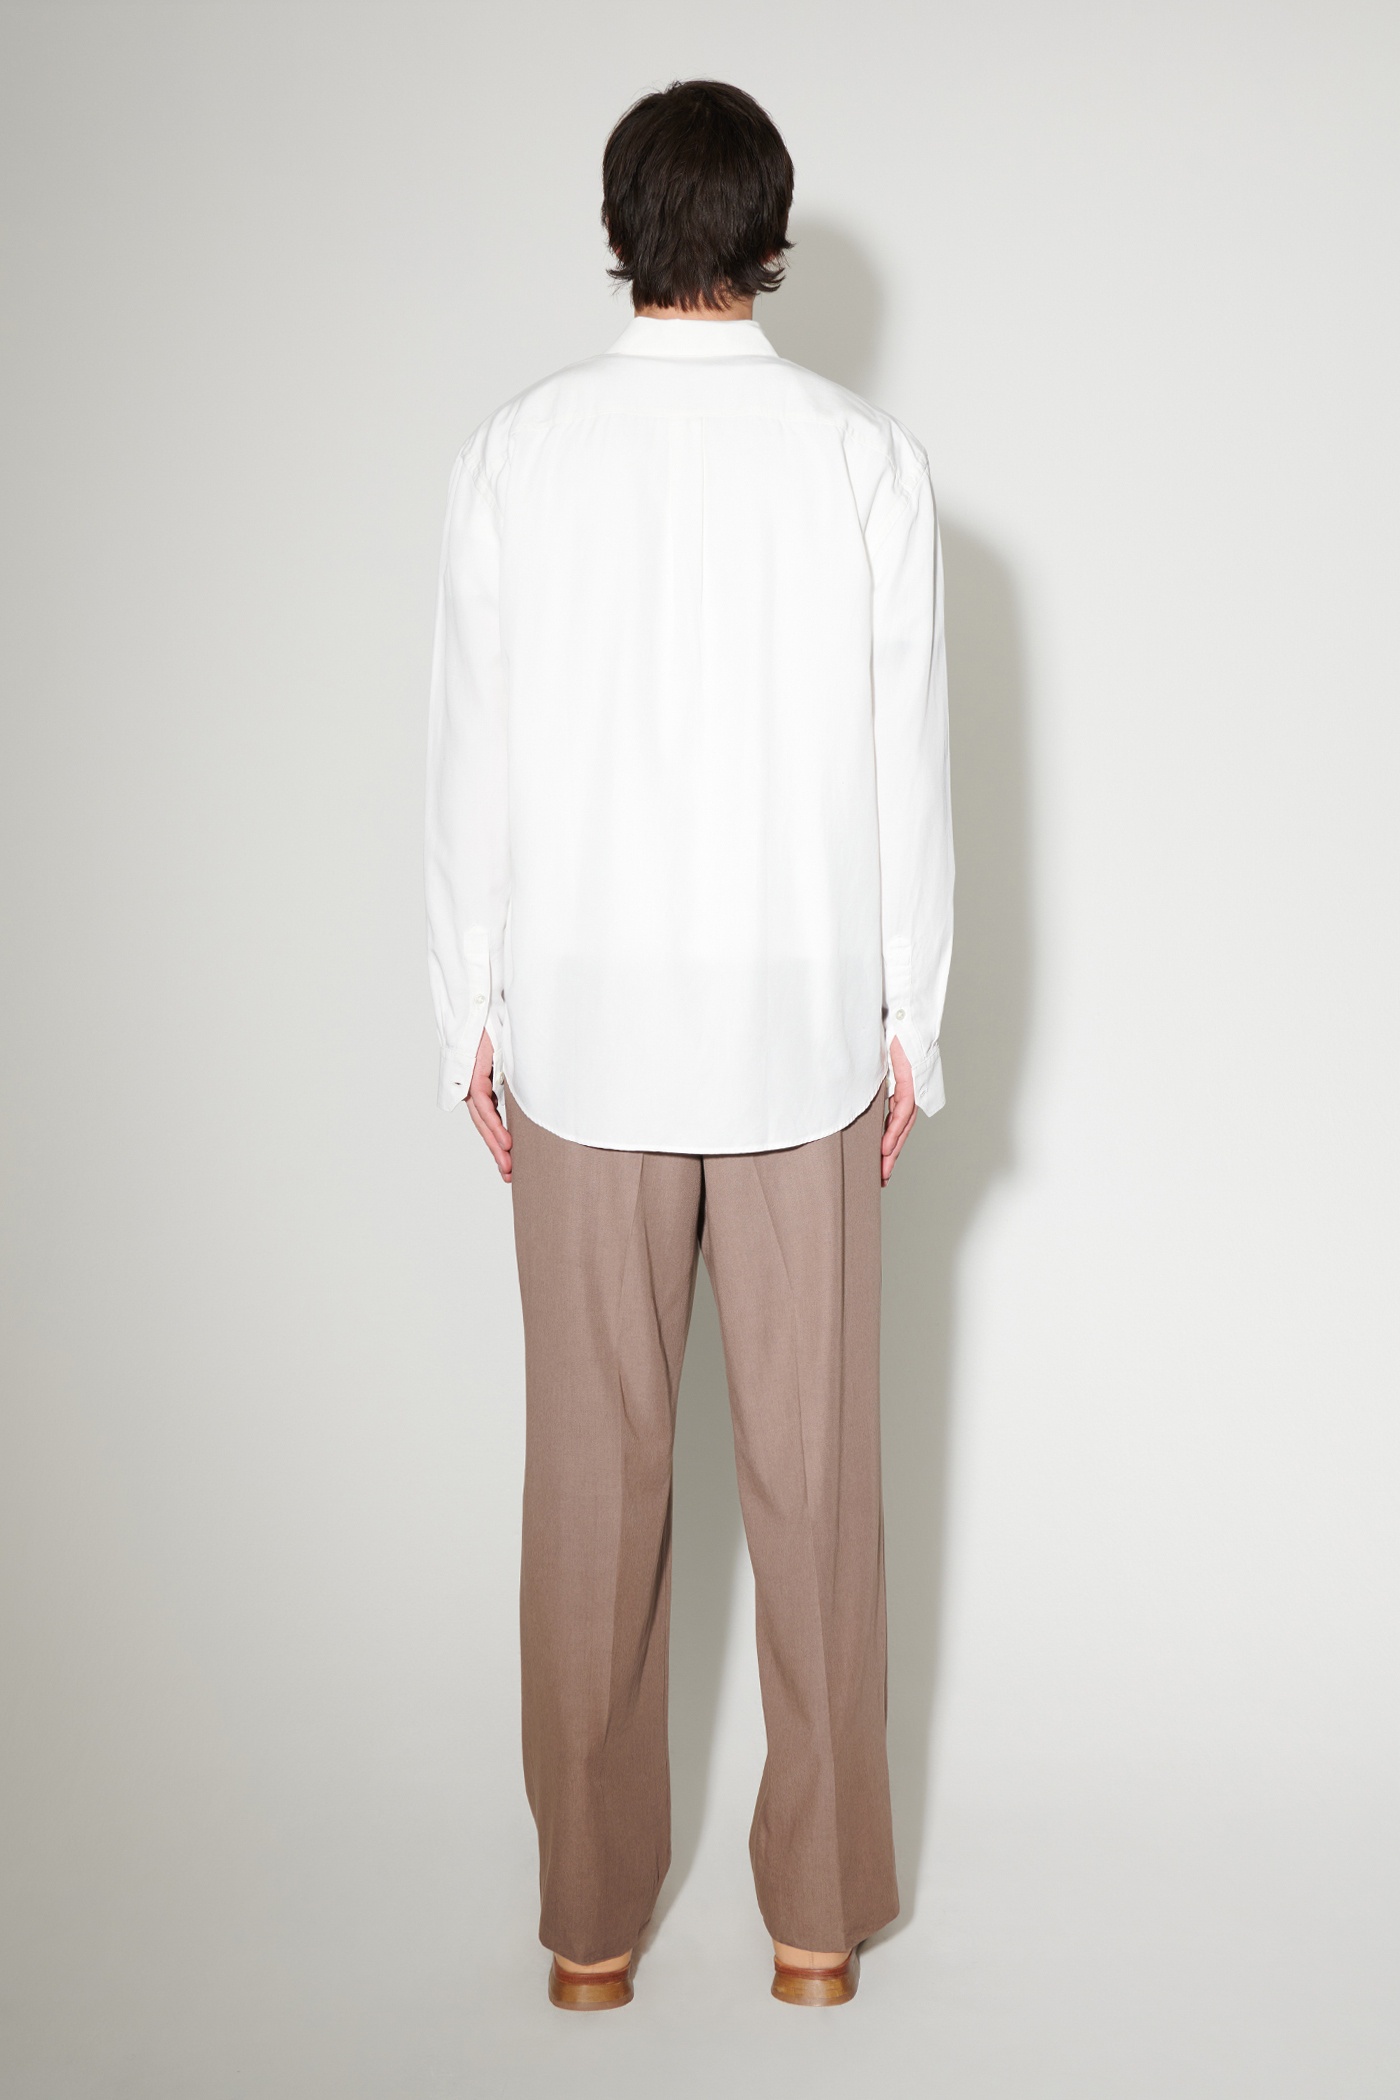 Initial Shirt Off White Lyocell - 6